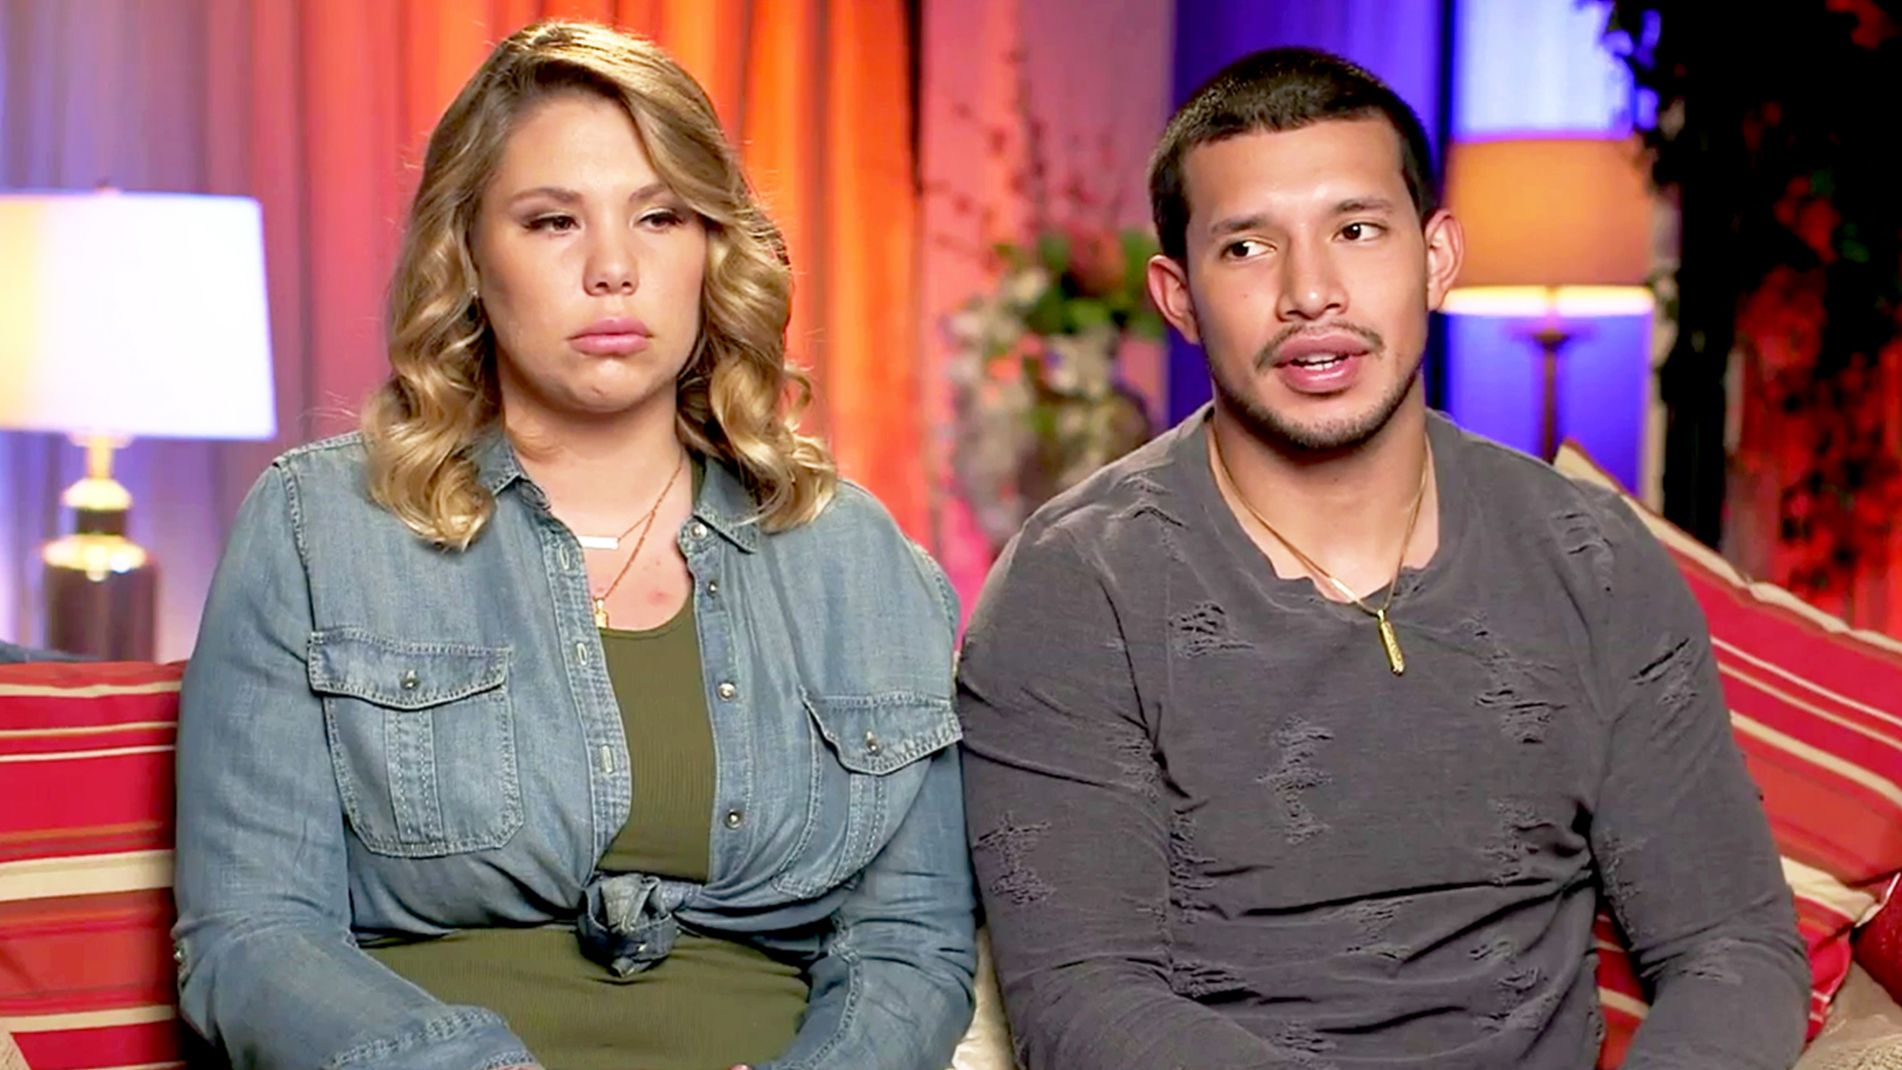 kailyn lowry and javi marroquin